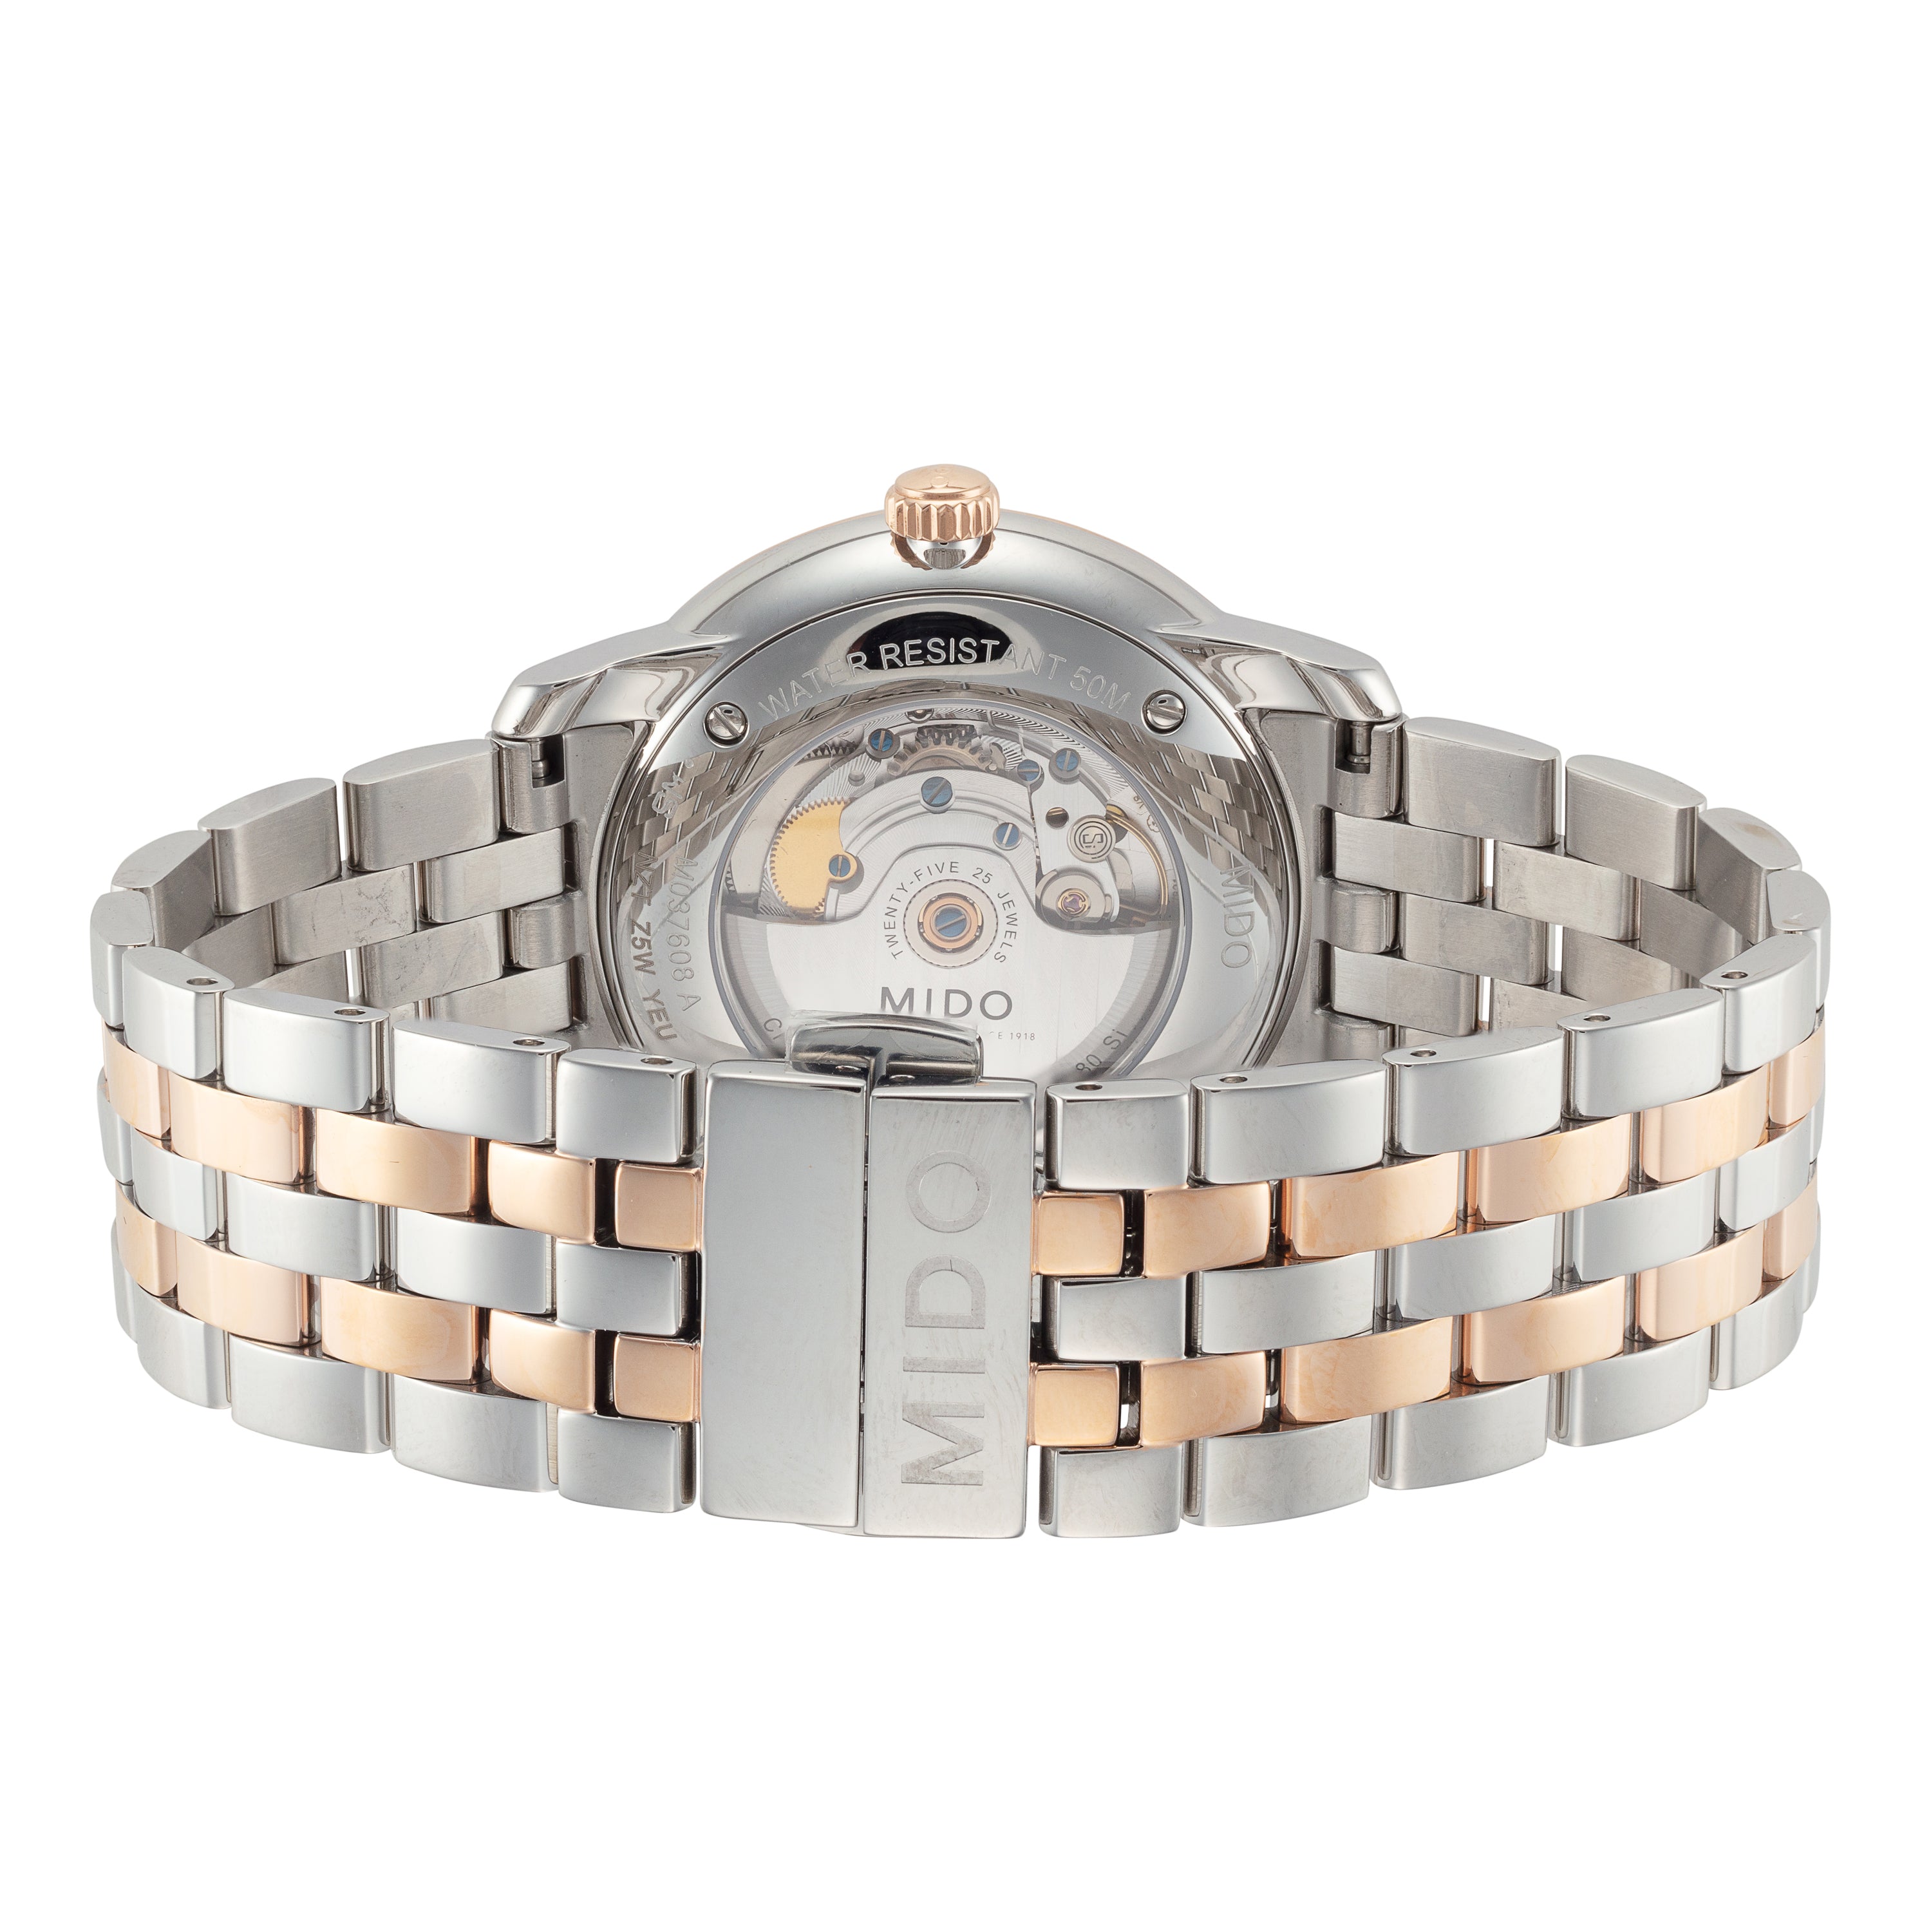 title:Mido Men's M0376082206200 Baroncelli Jubilee 42mm Automatic Watch;color:Silver and Rose Gold